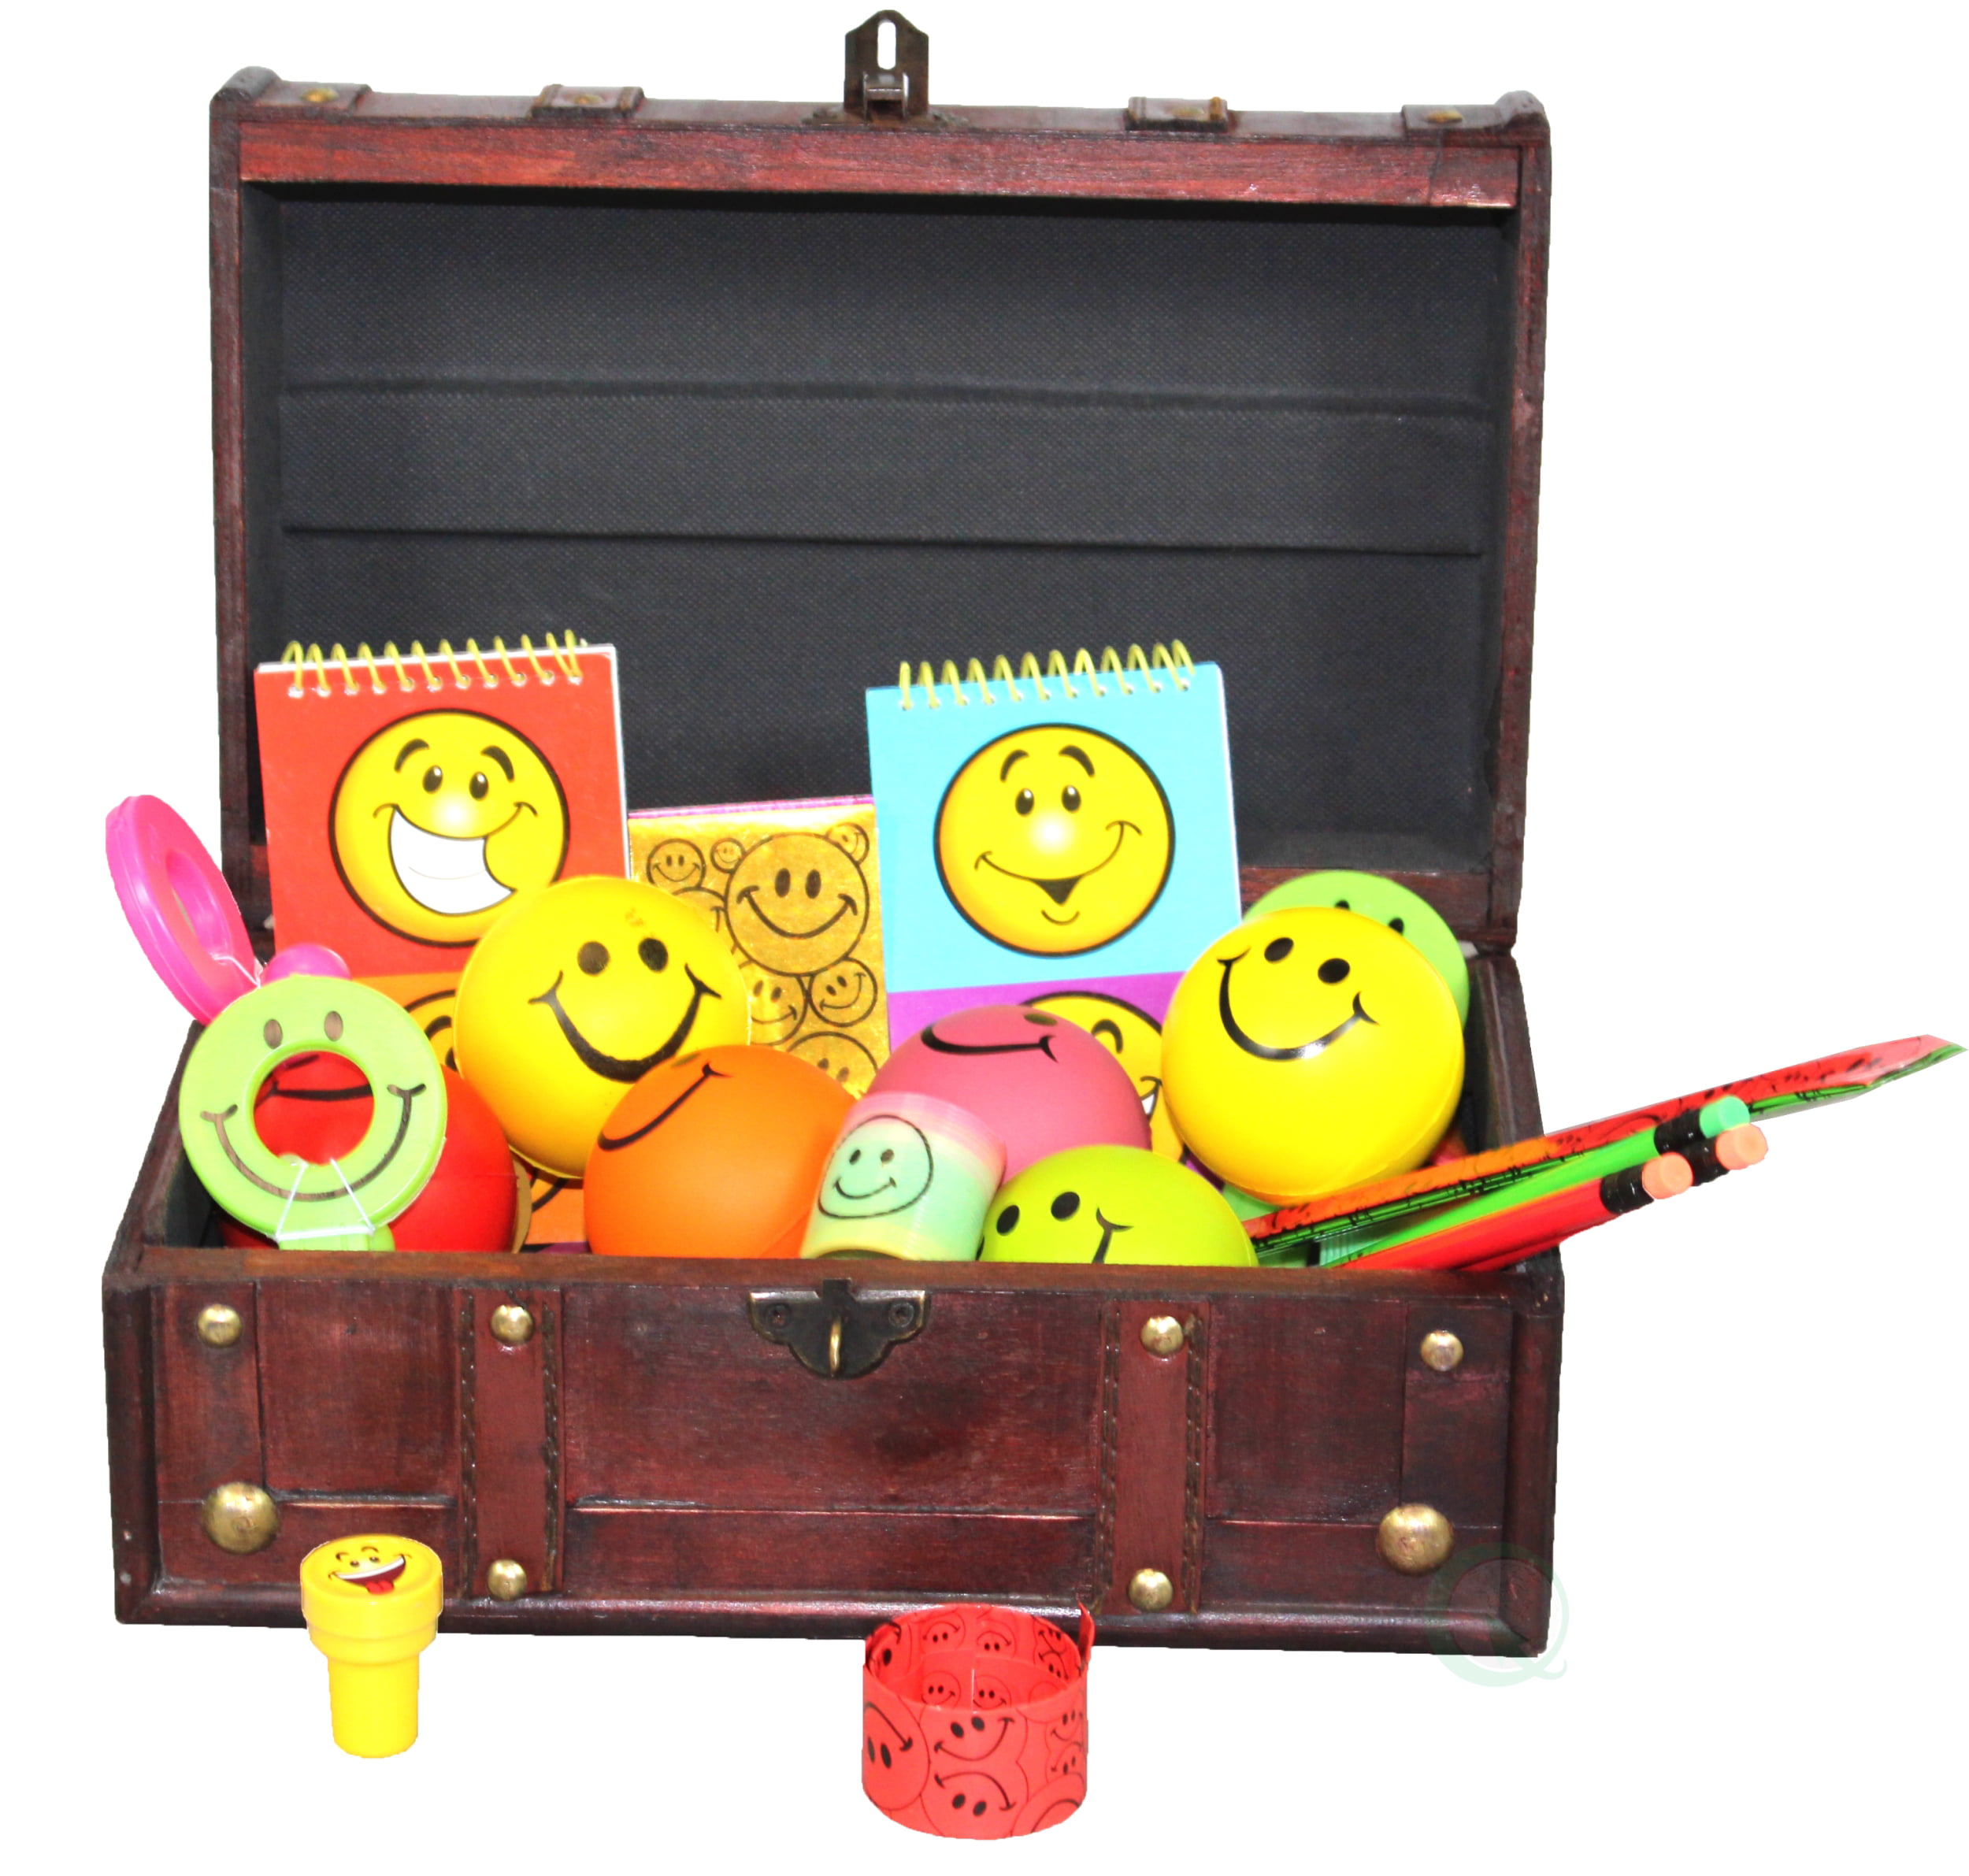 Pirate Treasure Chest Full of Toys (50 